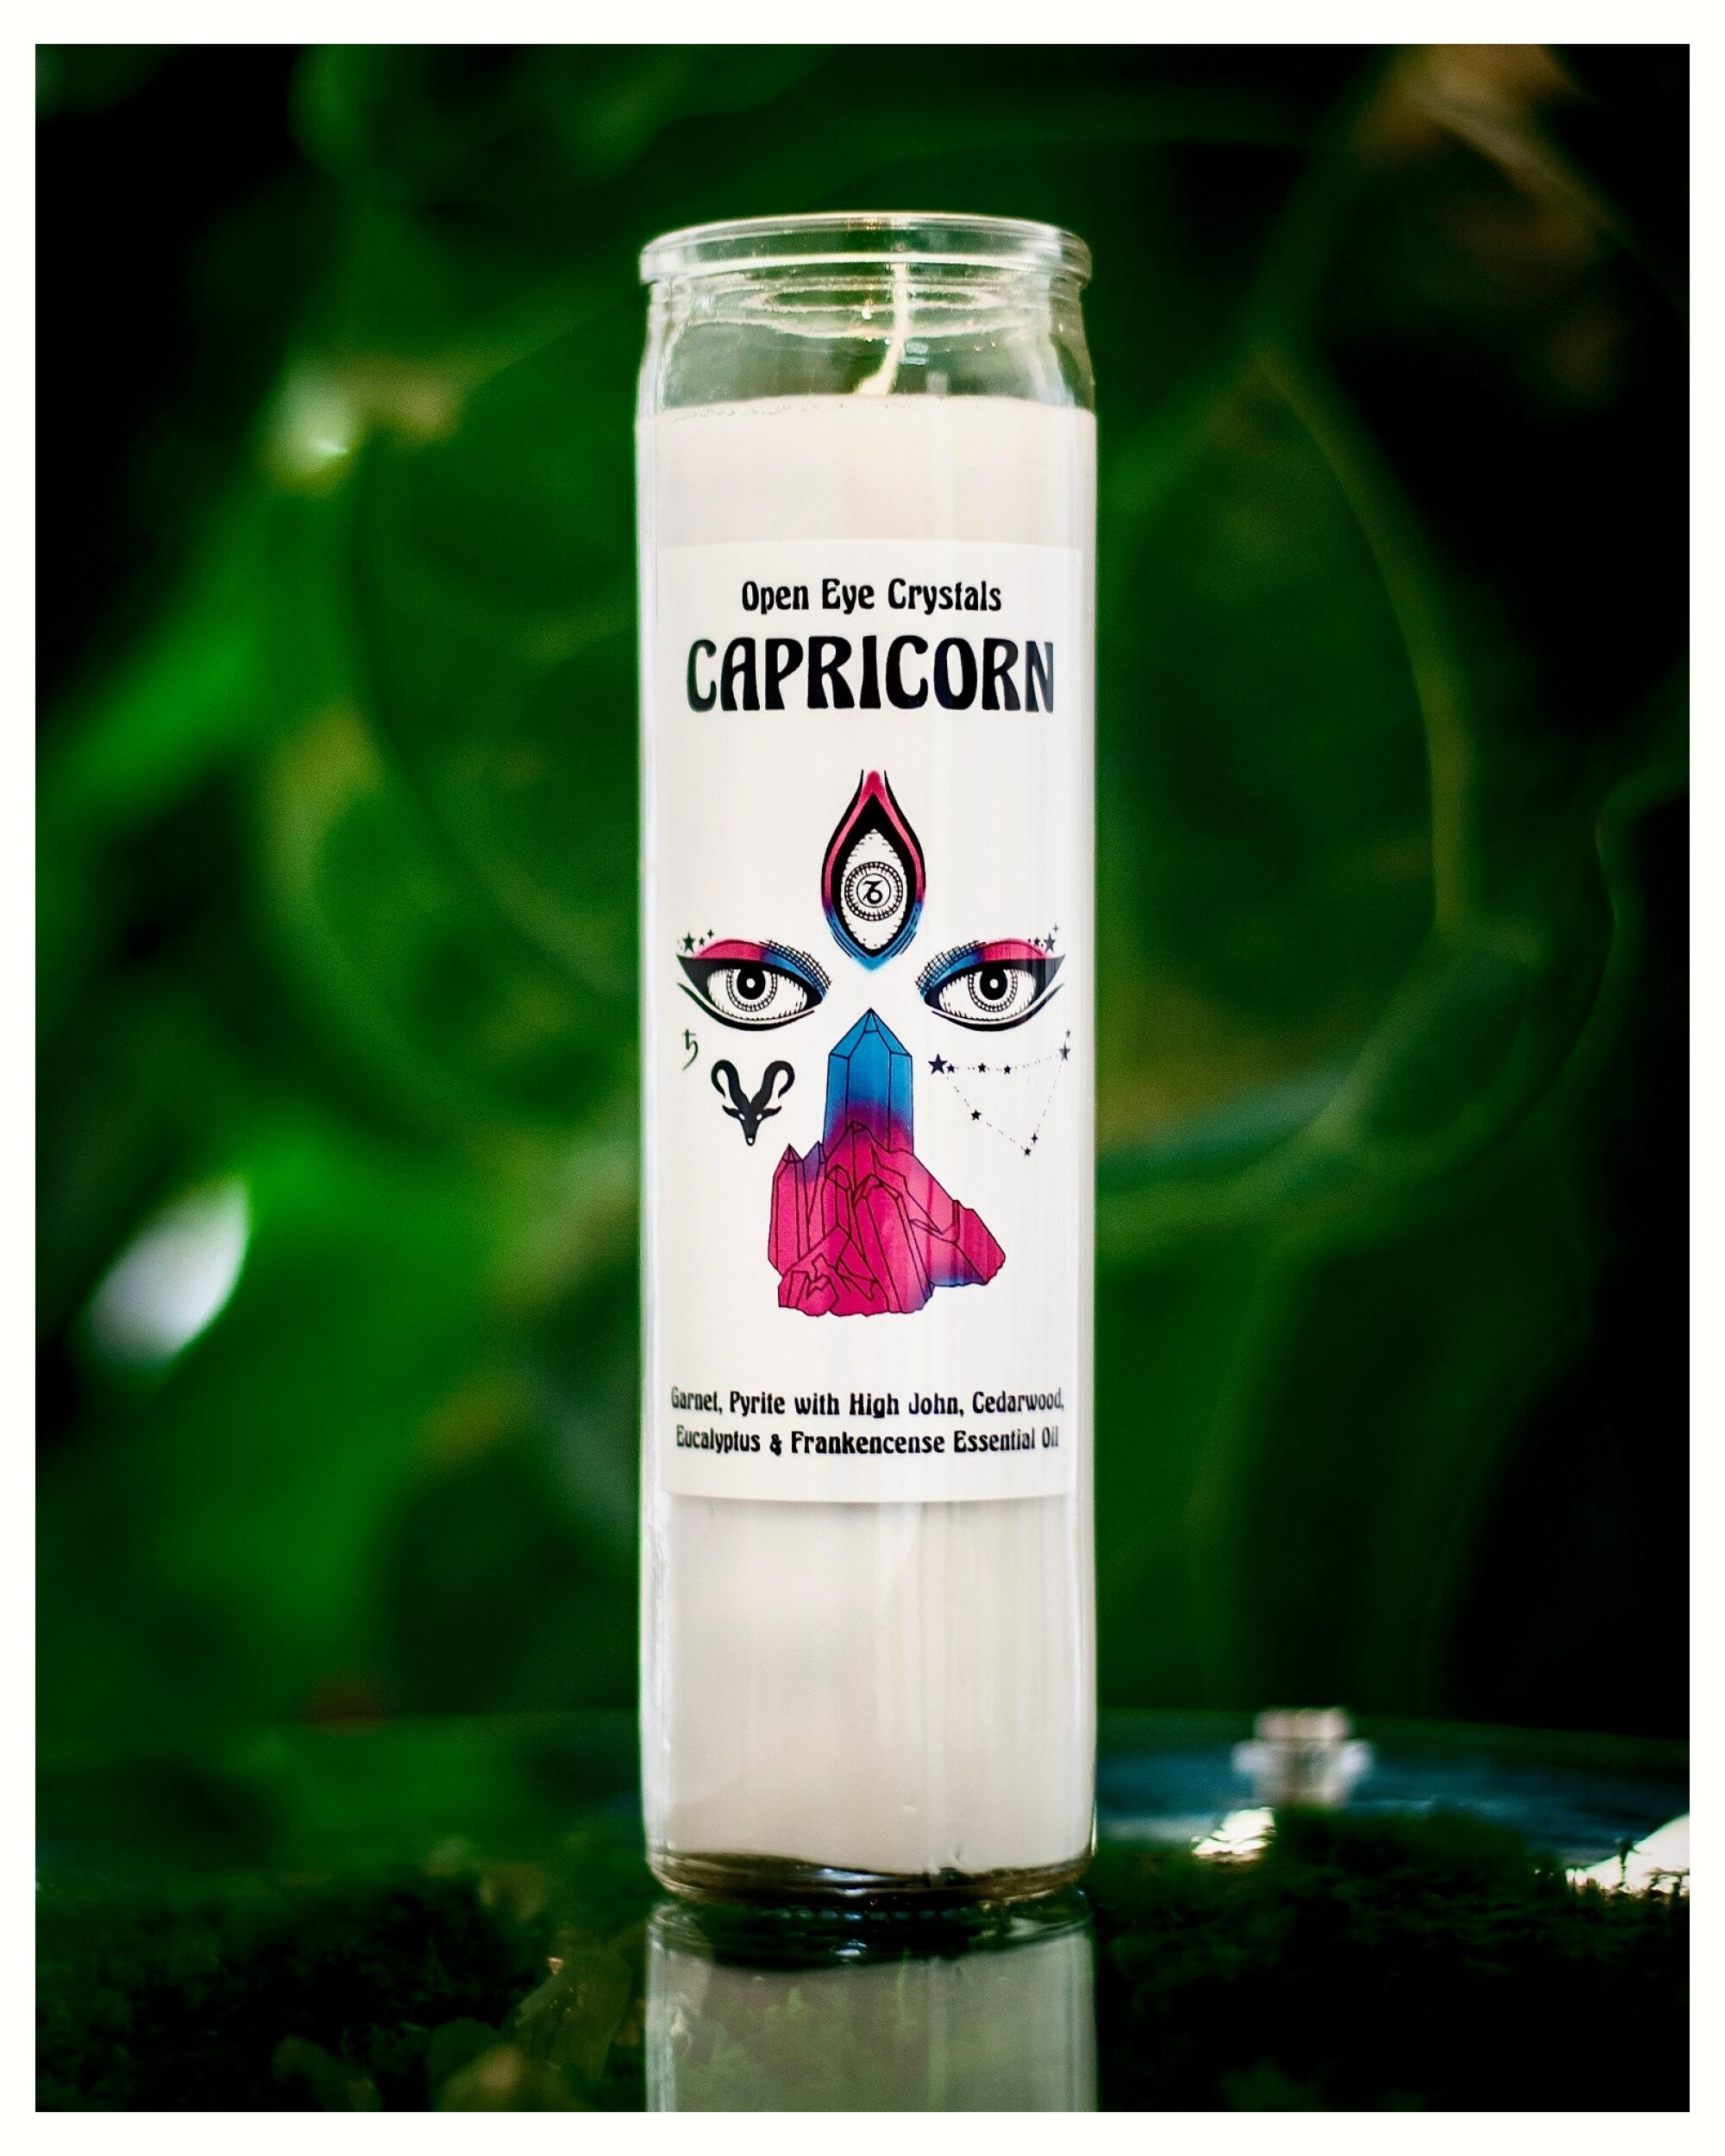 A Capricorn candle by Open Eye Crystals 